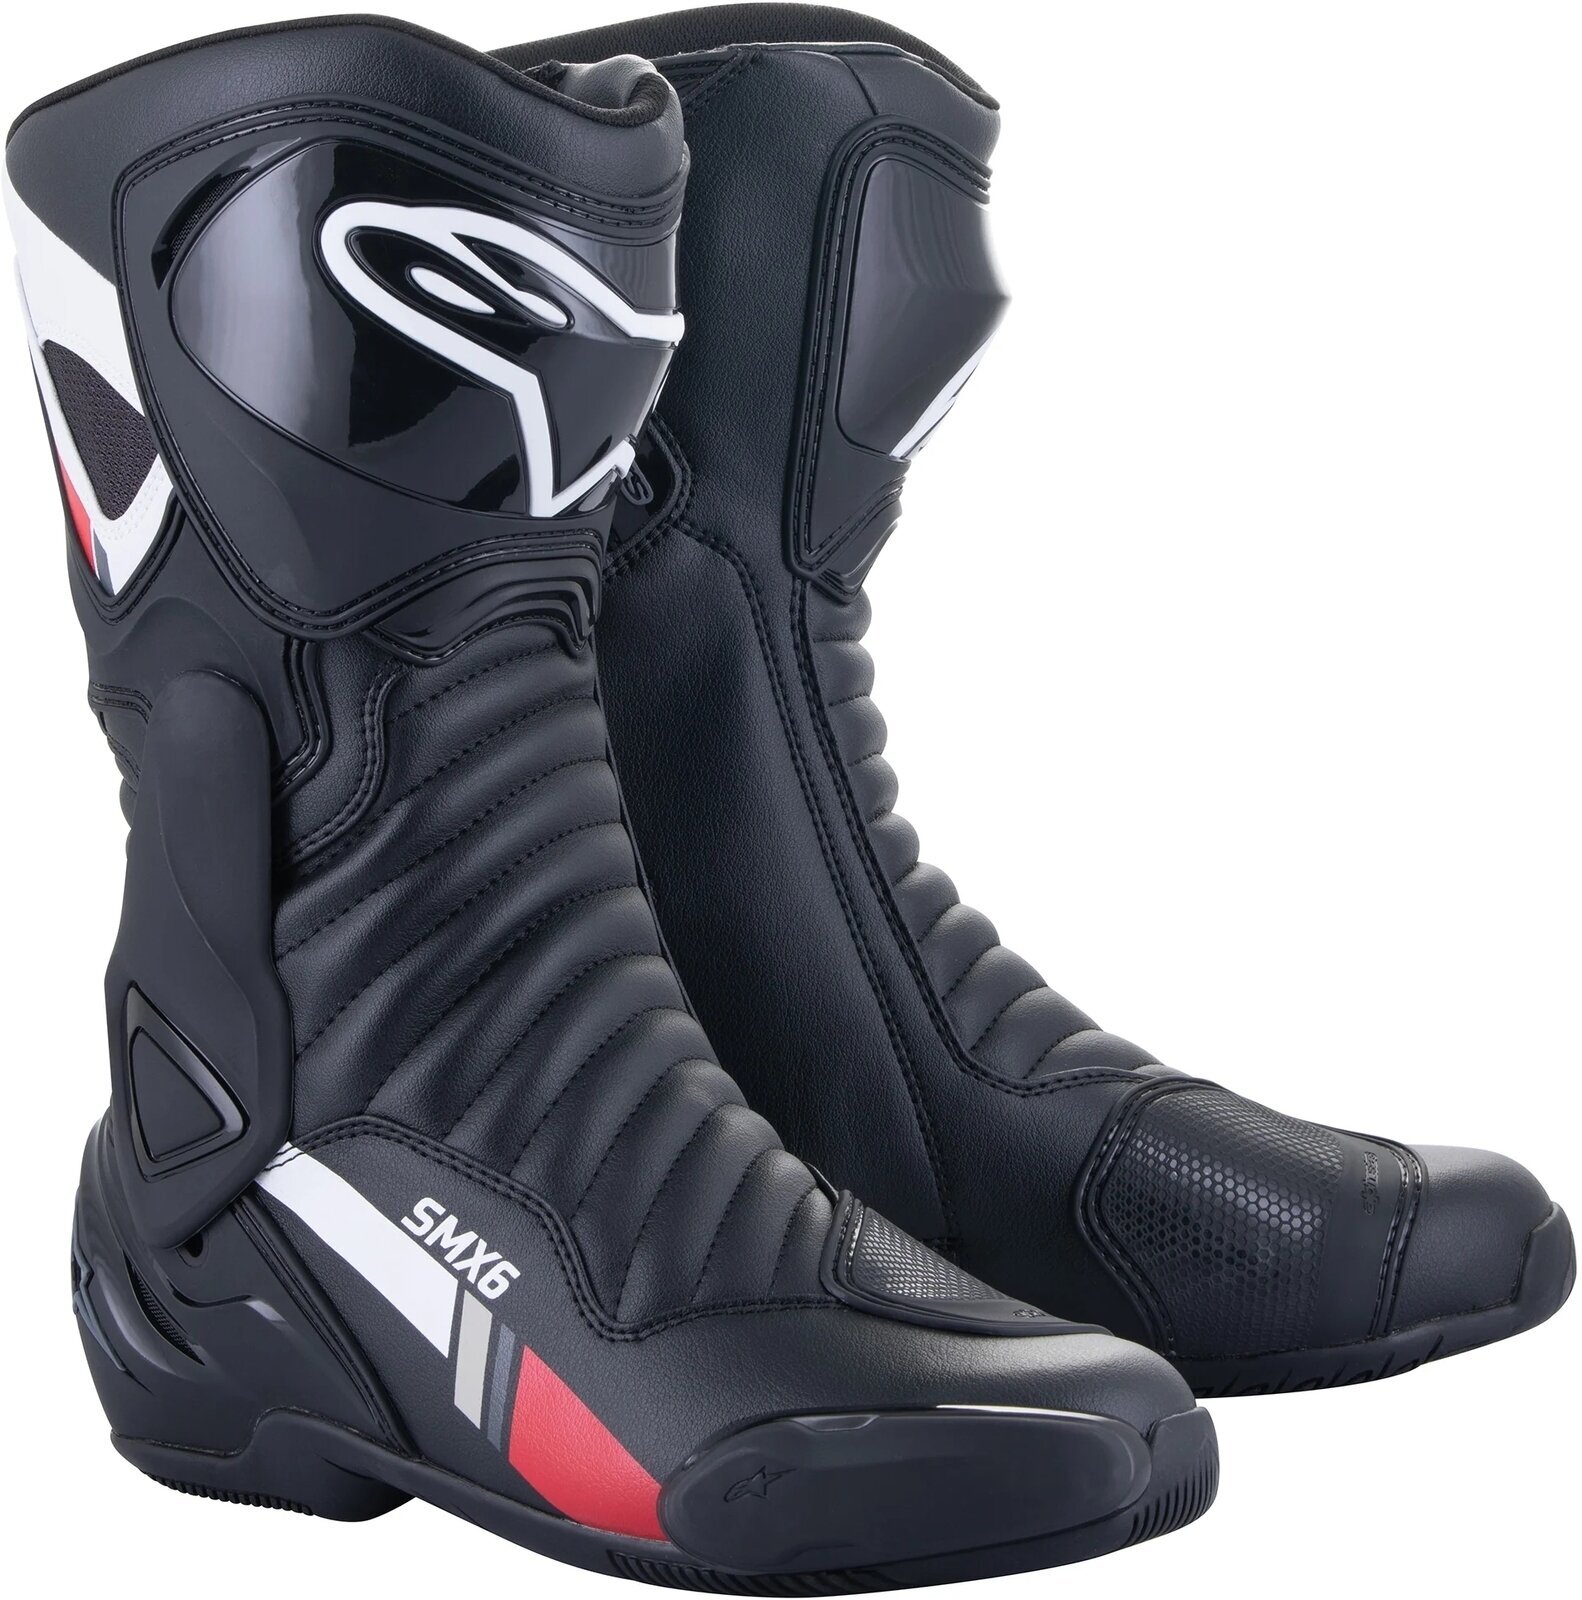 Photos - Motorcycle Clothing Alpinestars SMX-6 V2 Boots Black/White/Gray 46 Motorcycle Boot 